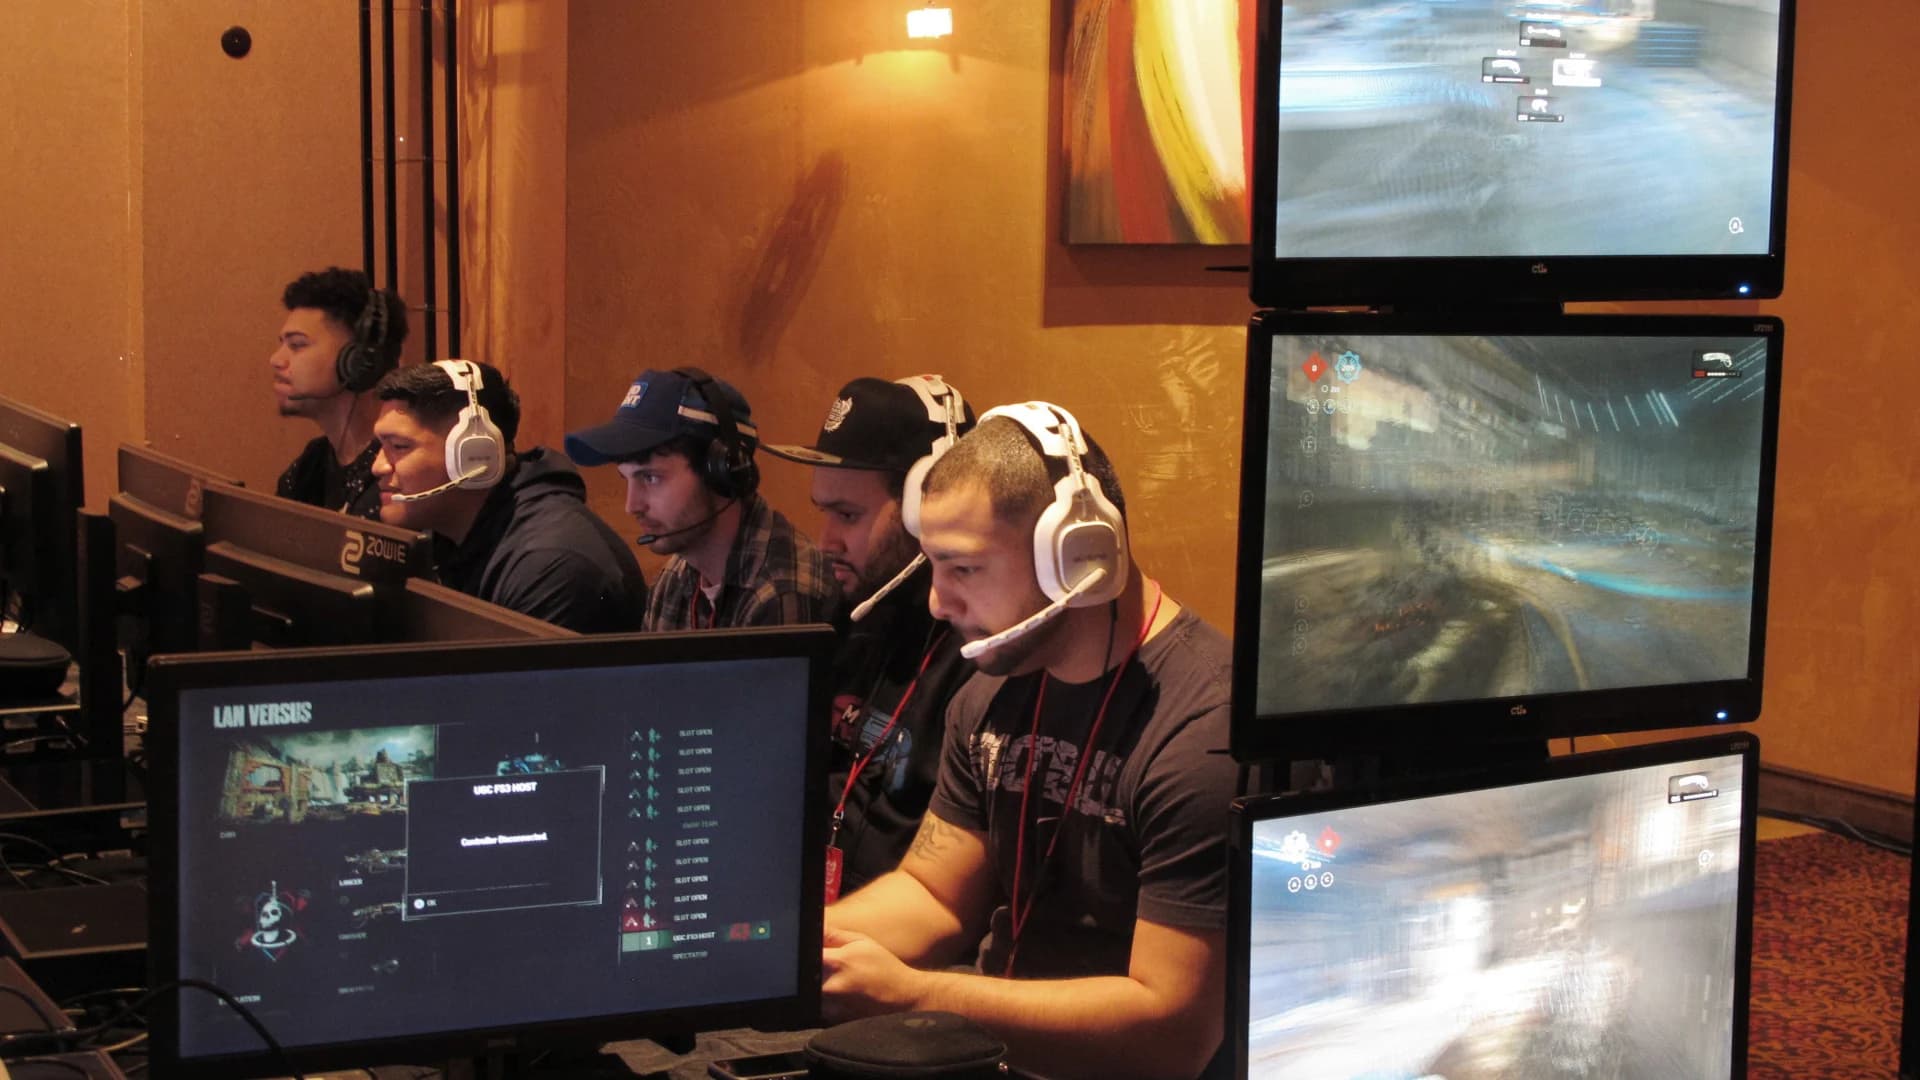 Game on: New Jersey vies to become national esports hub